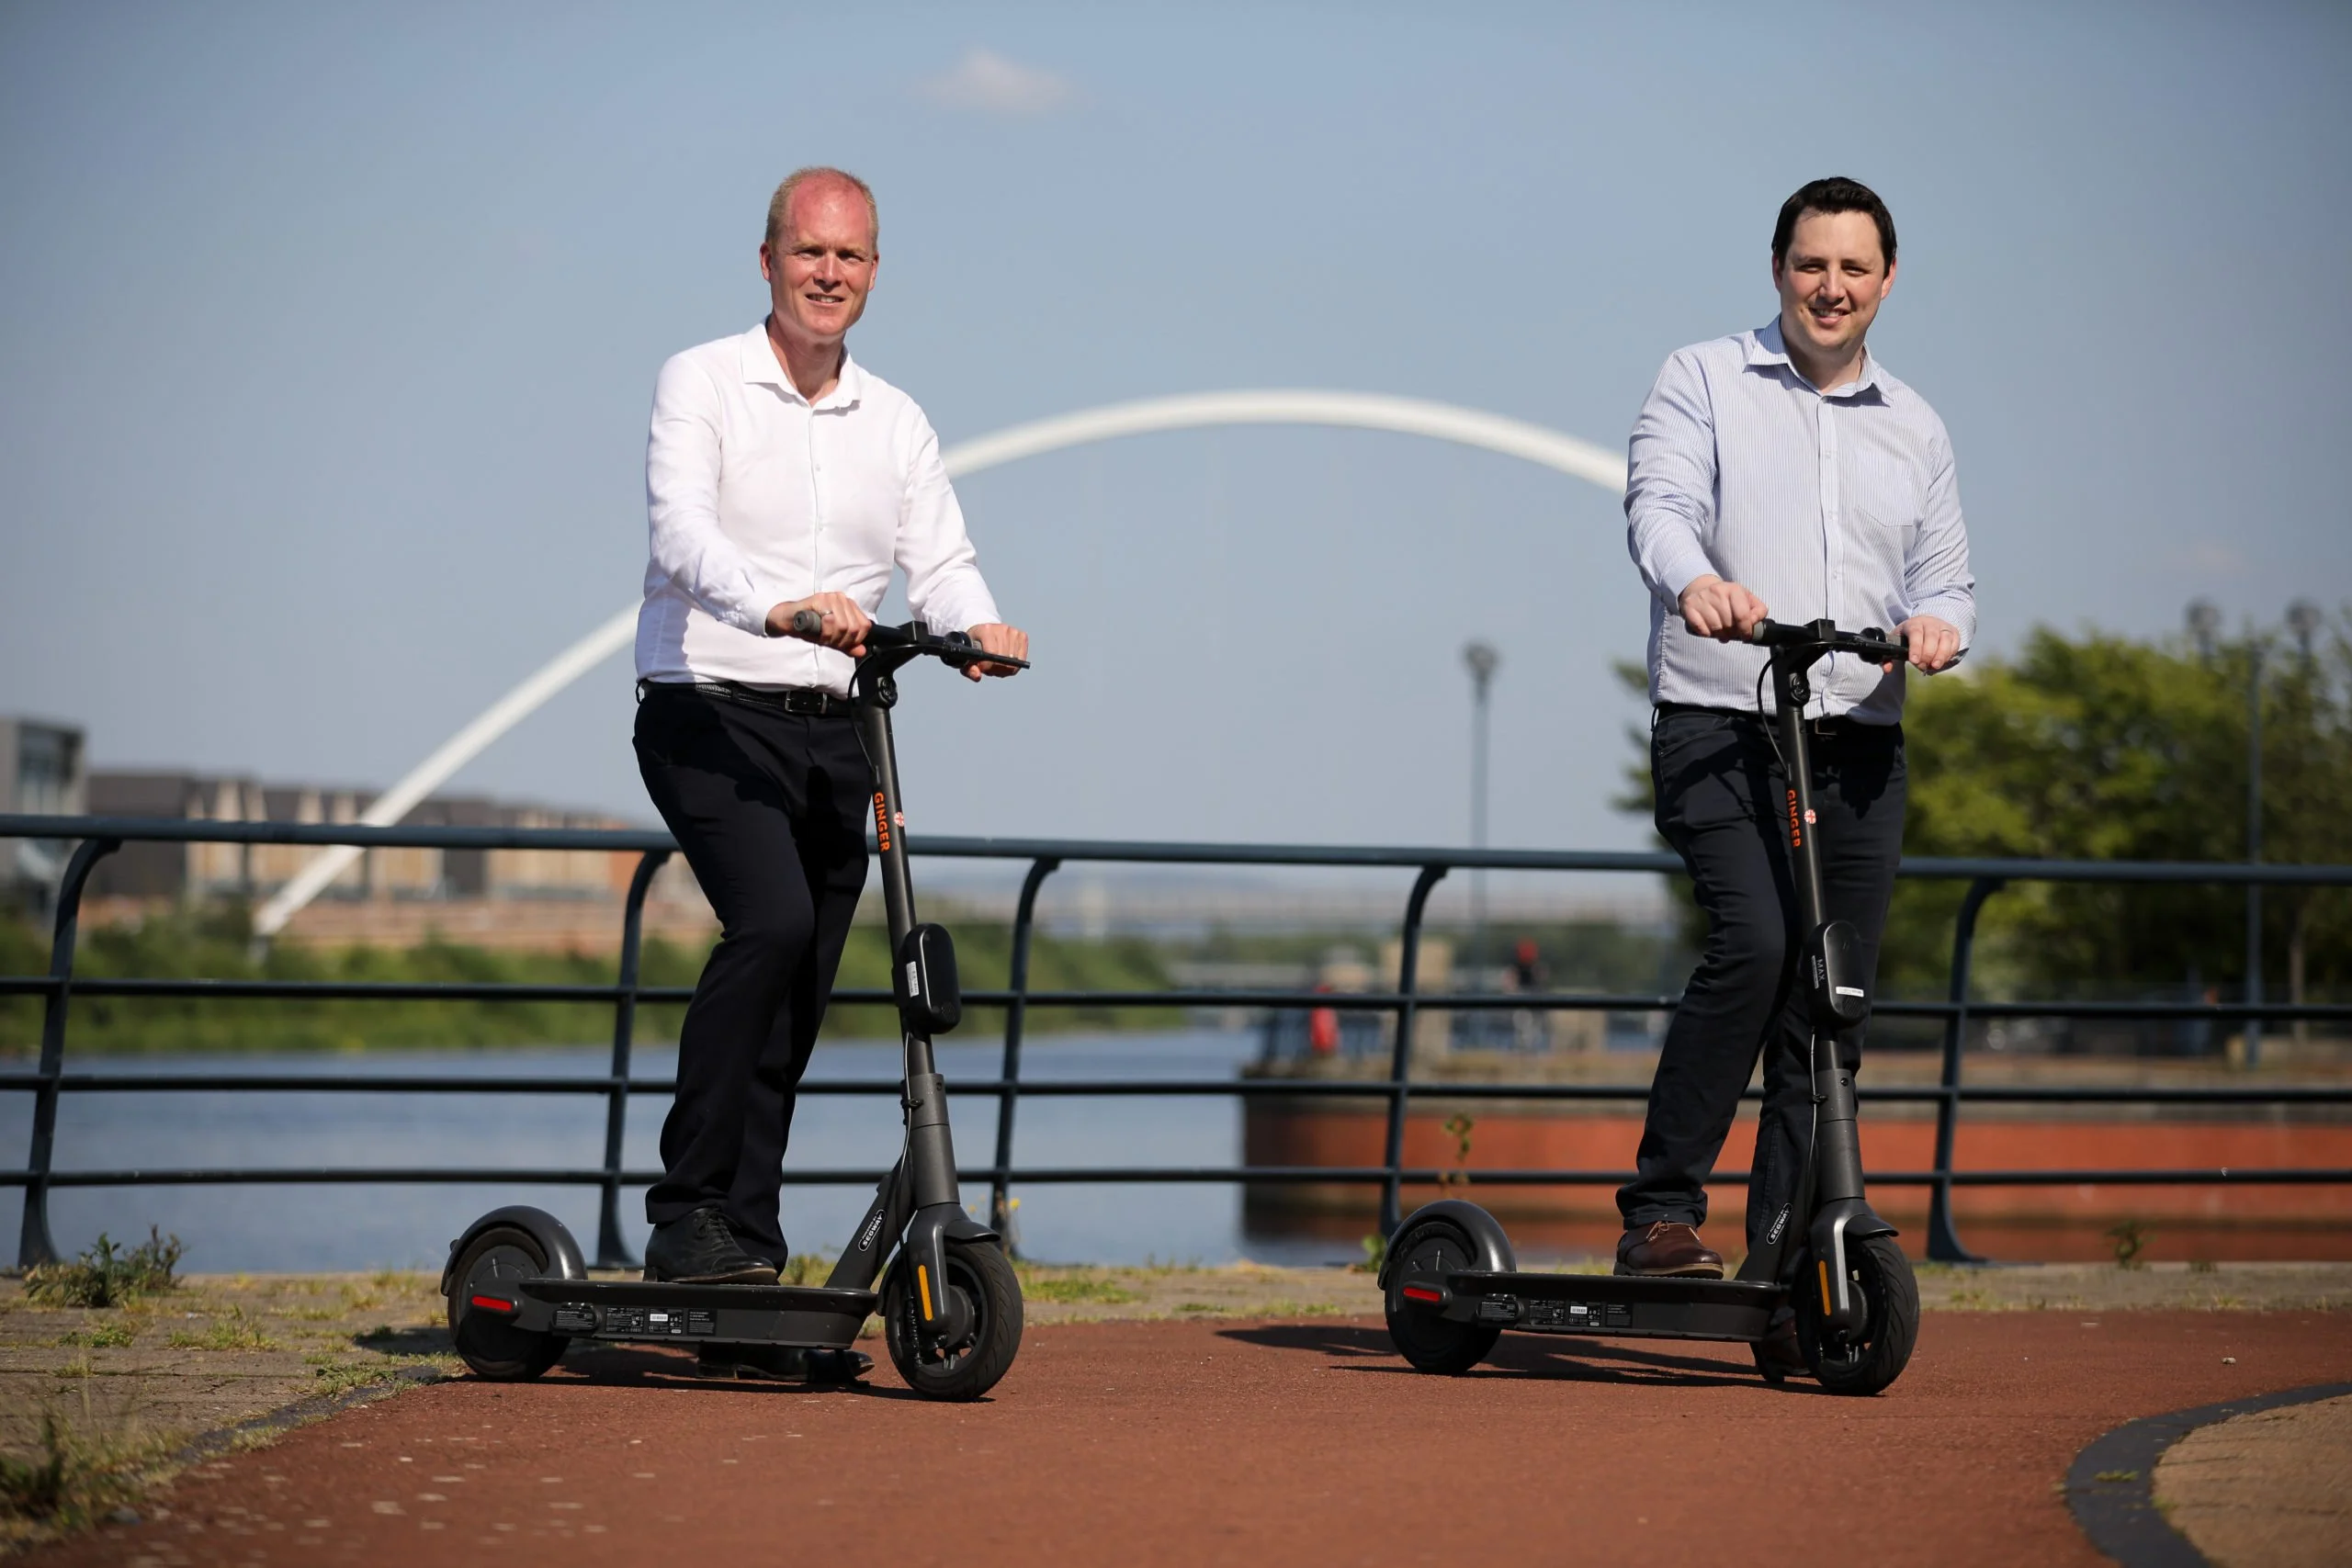 Tees Valley Mayor Ben Houchen with Paul Hodgins on E-Scooters